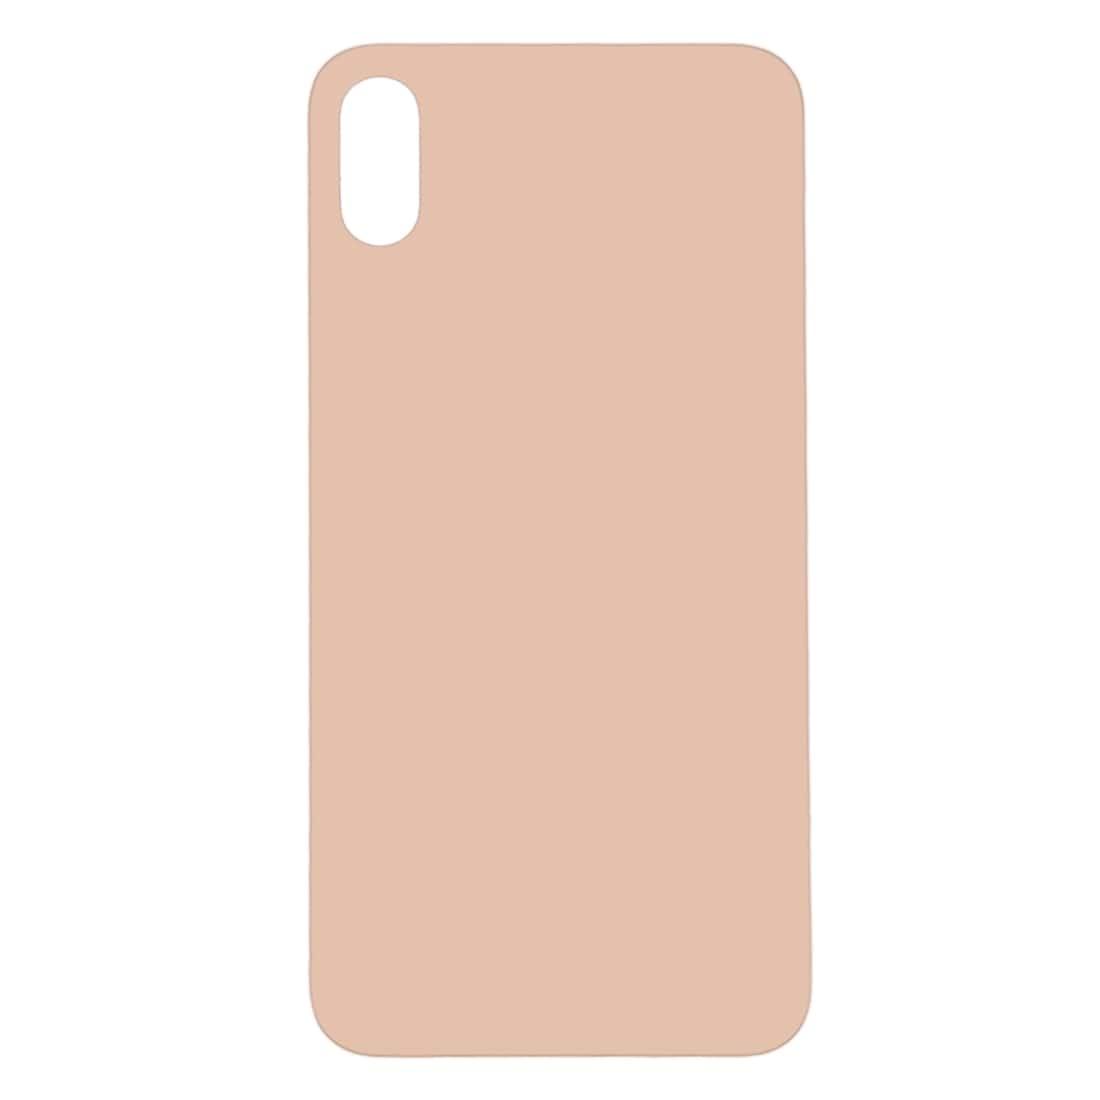 Back Glass Panel for  iPhone XS Gold